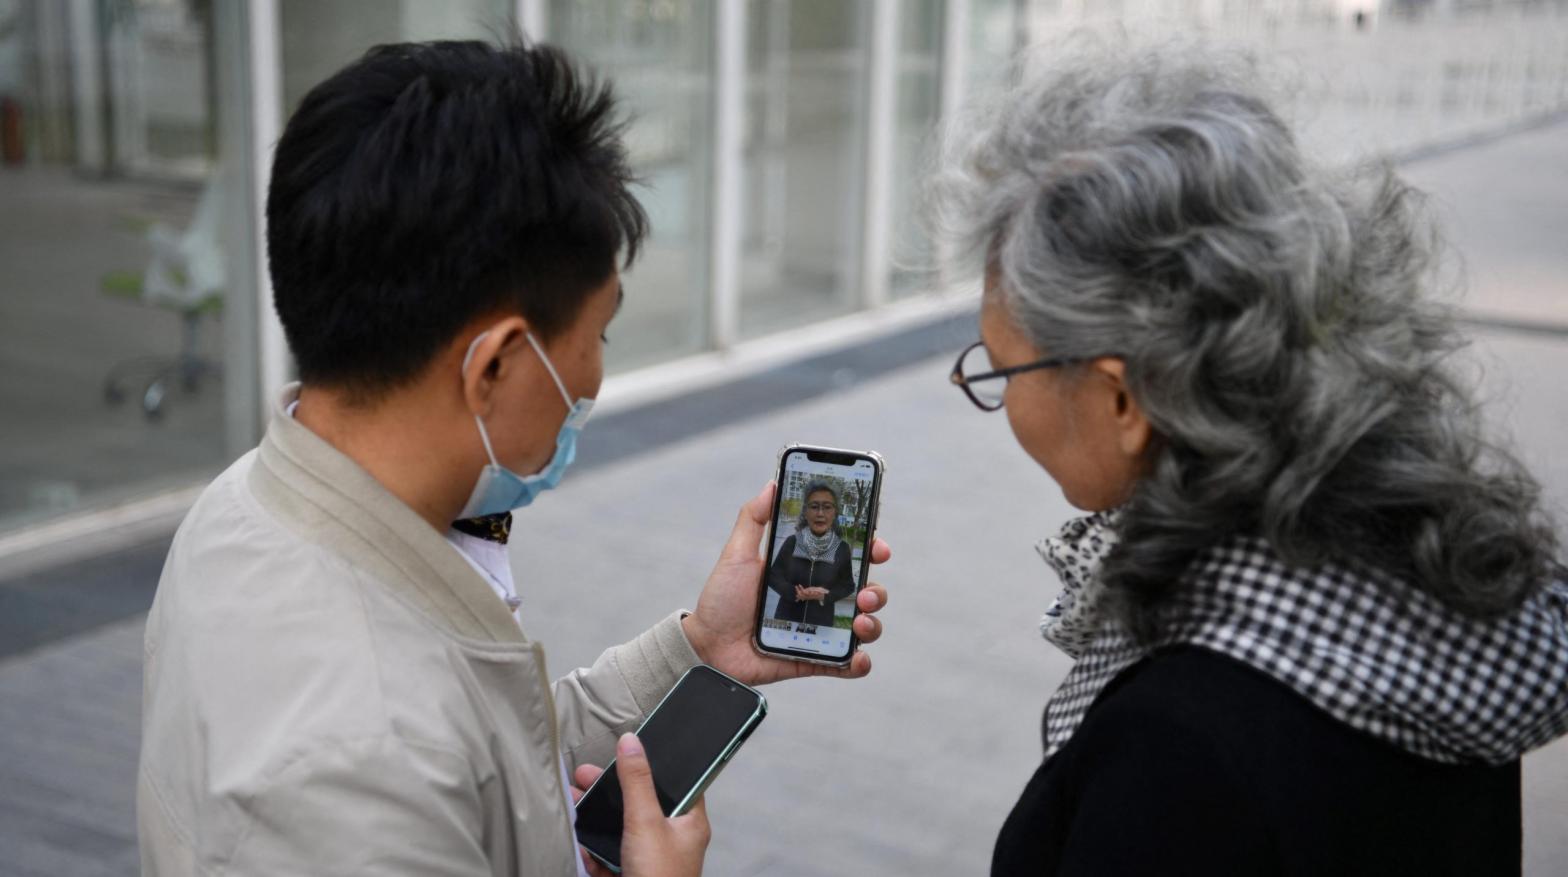 Chinese social media influencer and grandmother Ruan Yaqing, right, and her assistant Xie Xincun, left, reviewing a video intended for her channels on short-form video apps Kuaishou and Douyin in Beijing in April 2021. (Photo: Greg Baker / AFP, Getty Images)